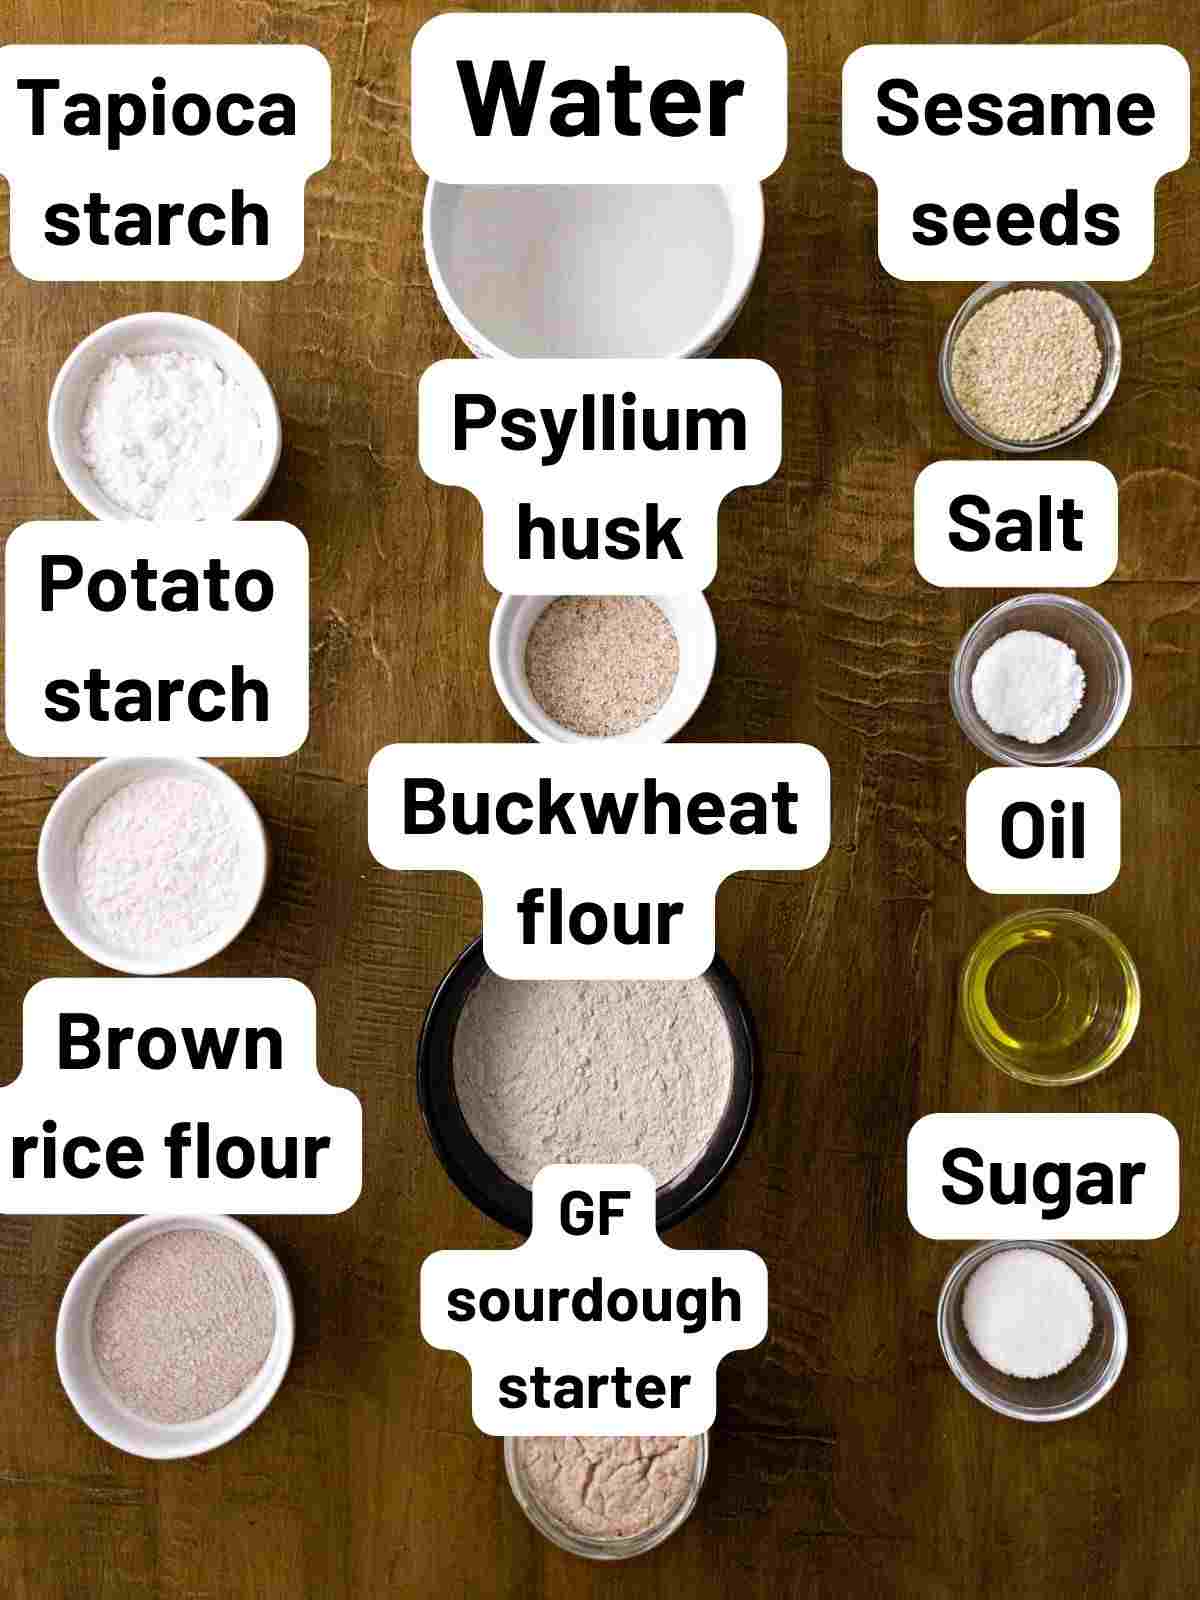 Ingredients on a wooden surface.